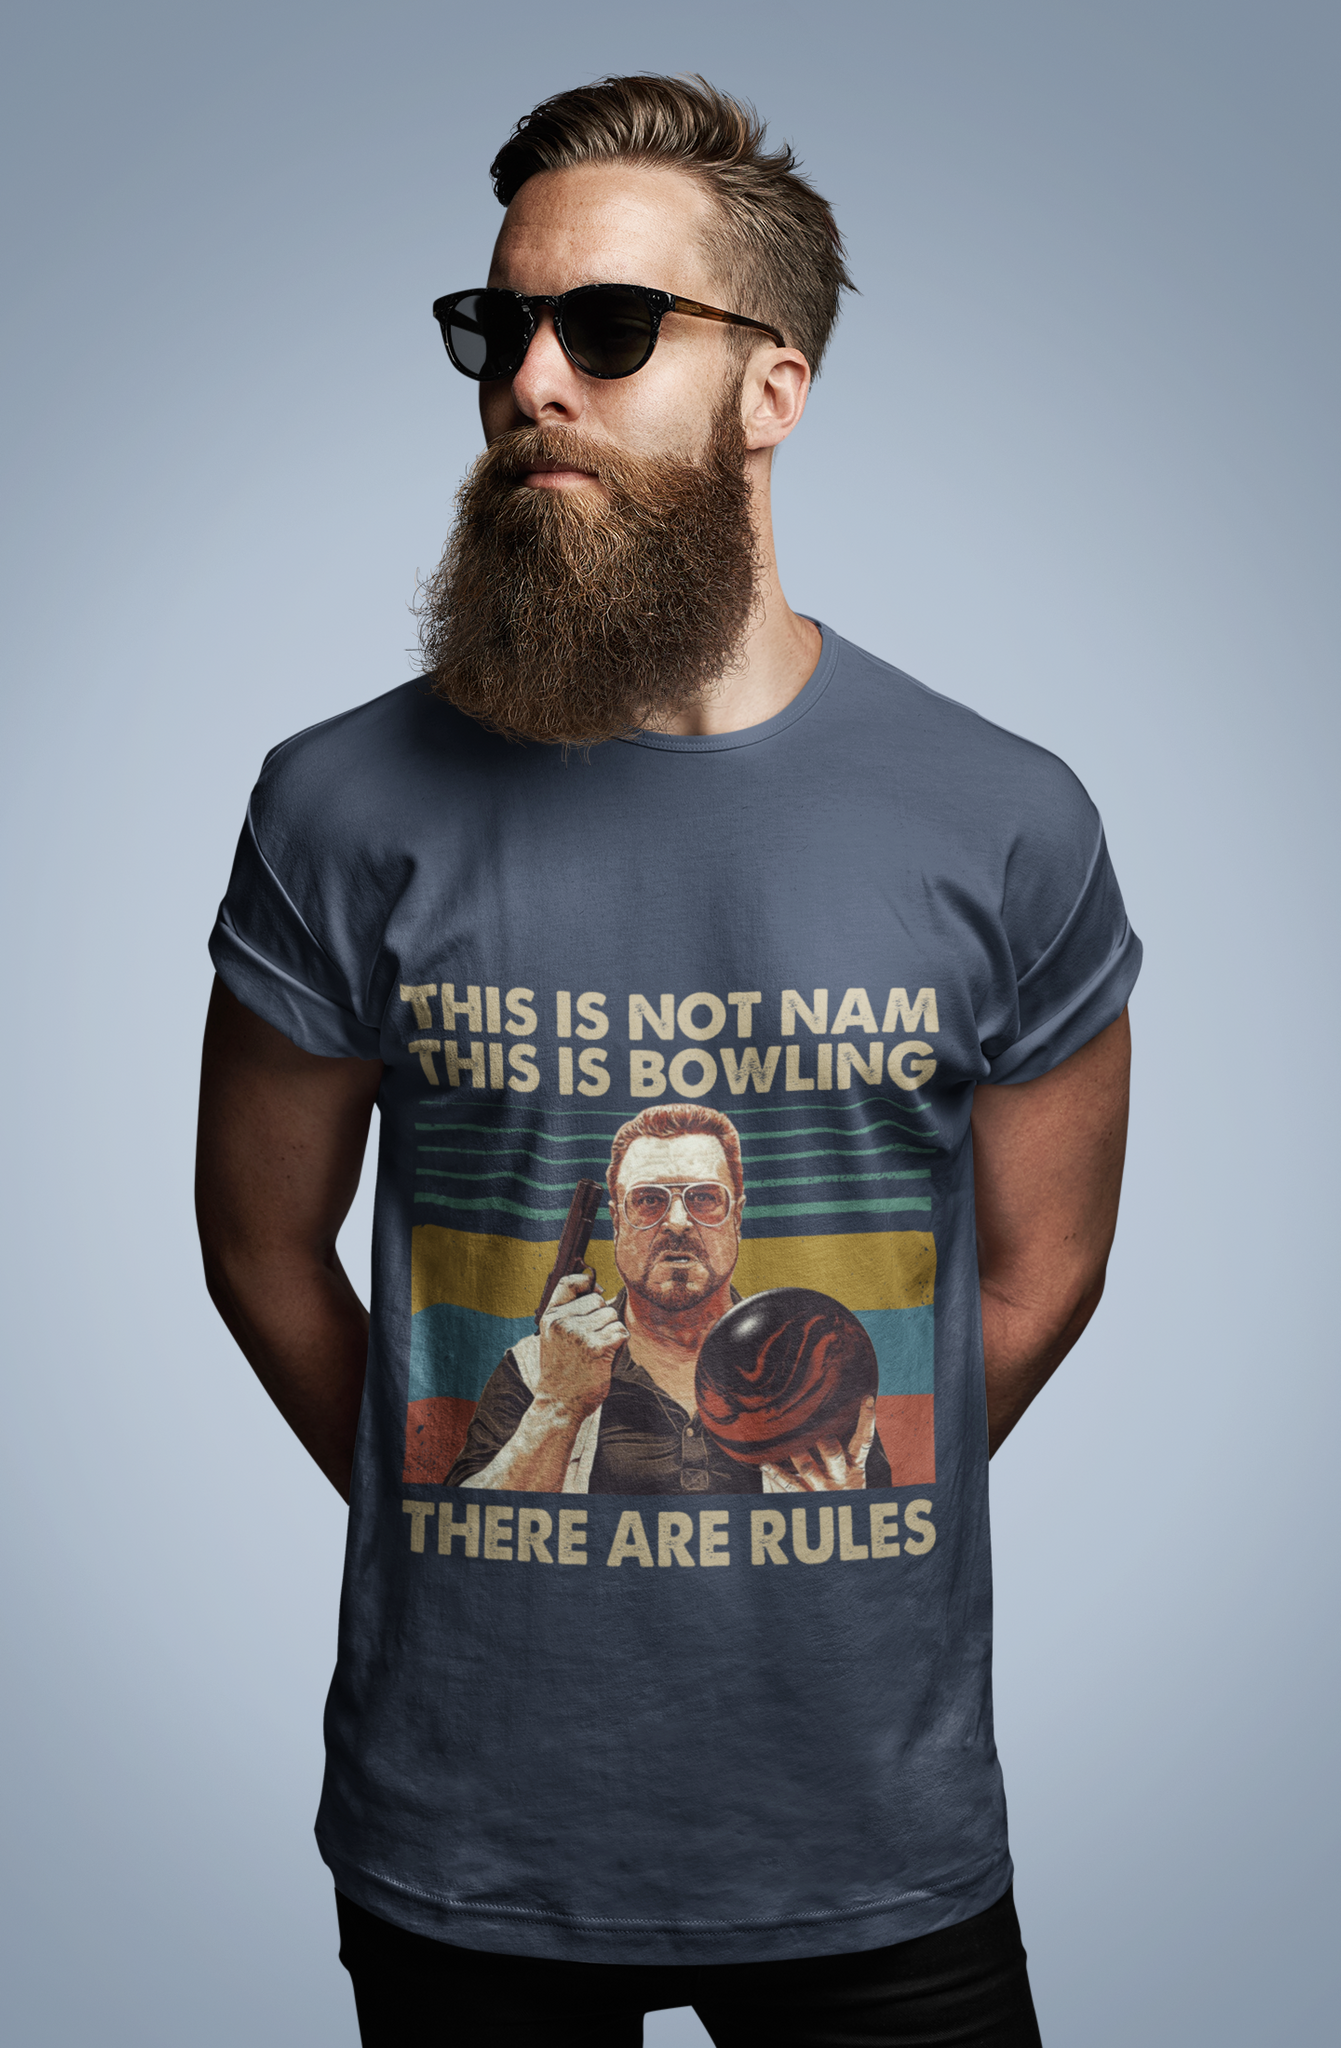 The Big Lebowski Vintage T Shirt, This Is Not Nam This Is Bowling There Are Rules Vintage Tshirt, Walter Sobchak T Shirt